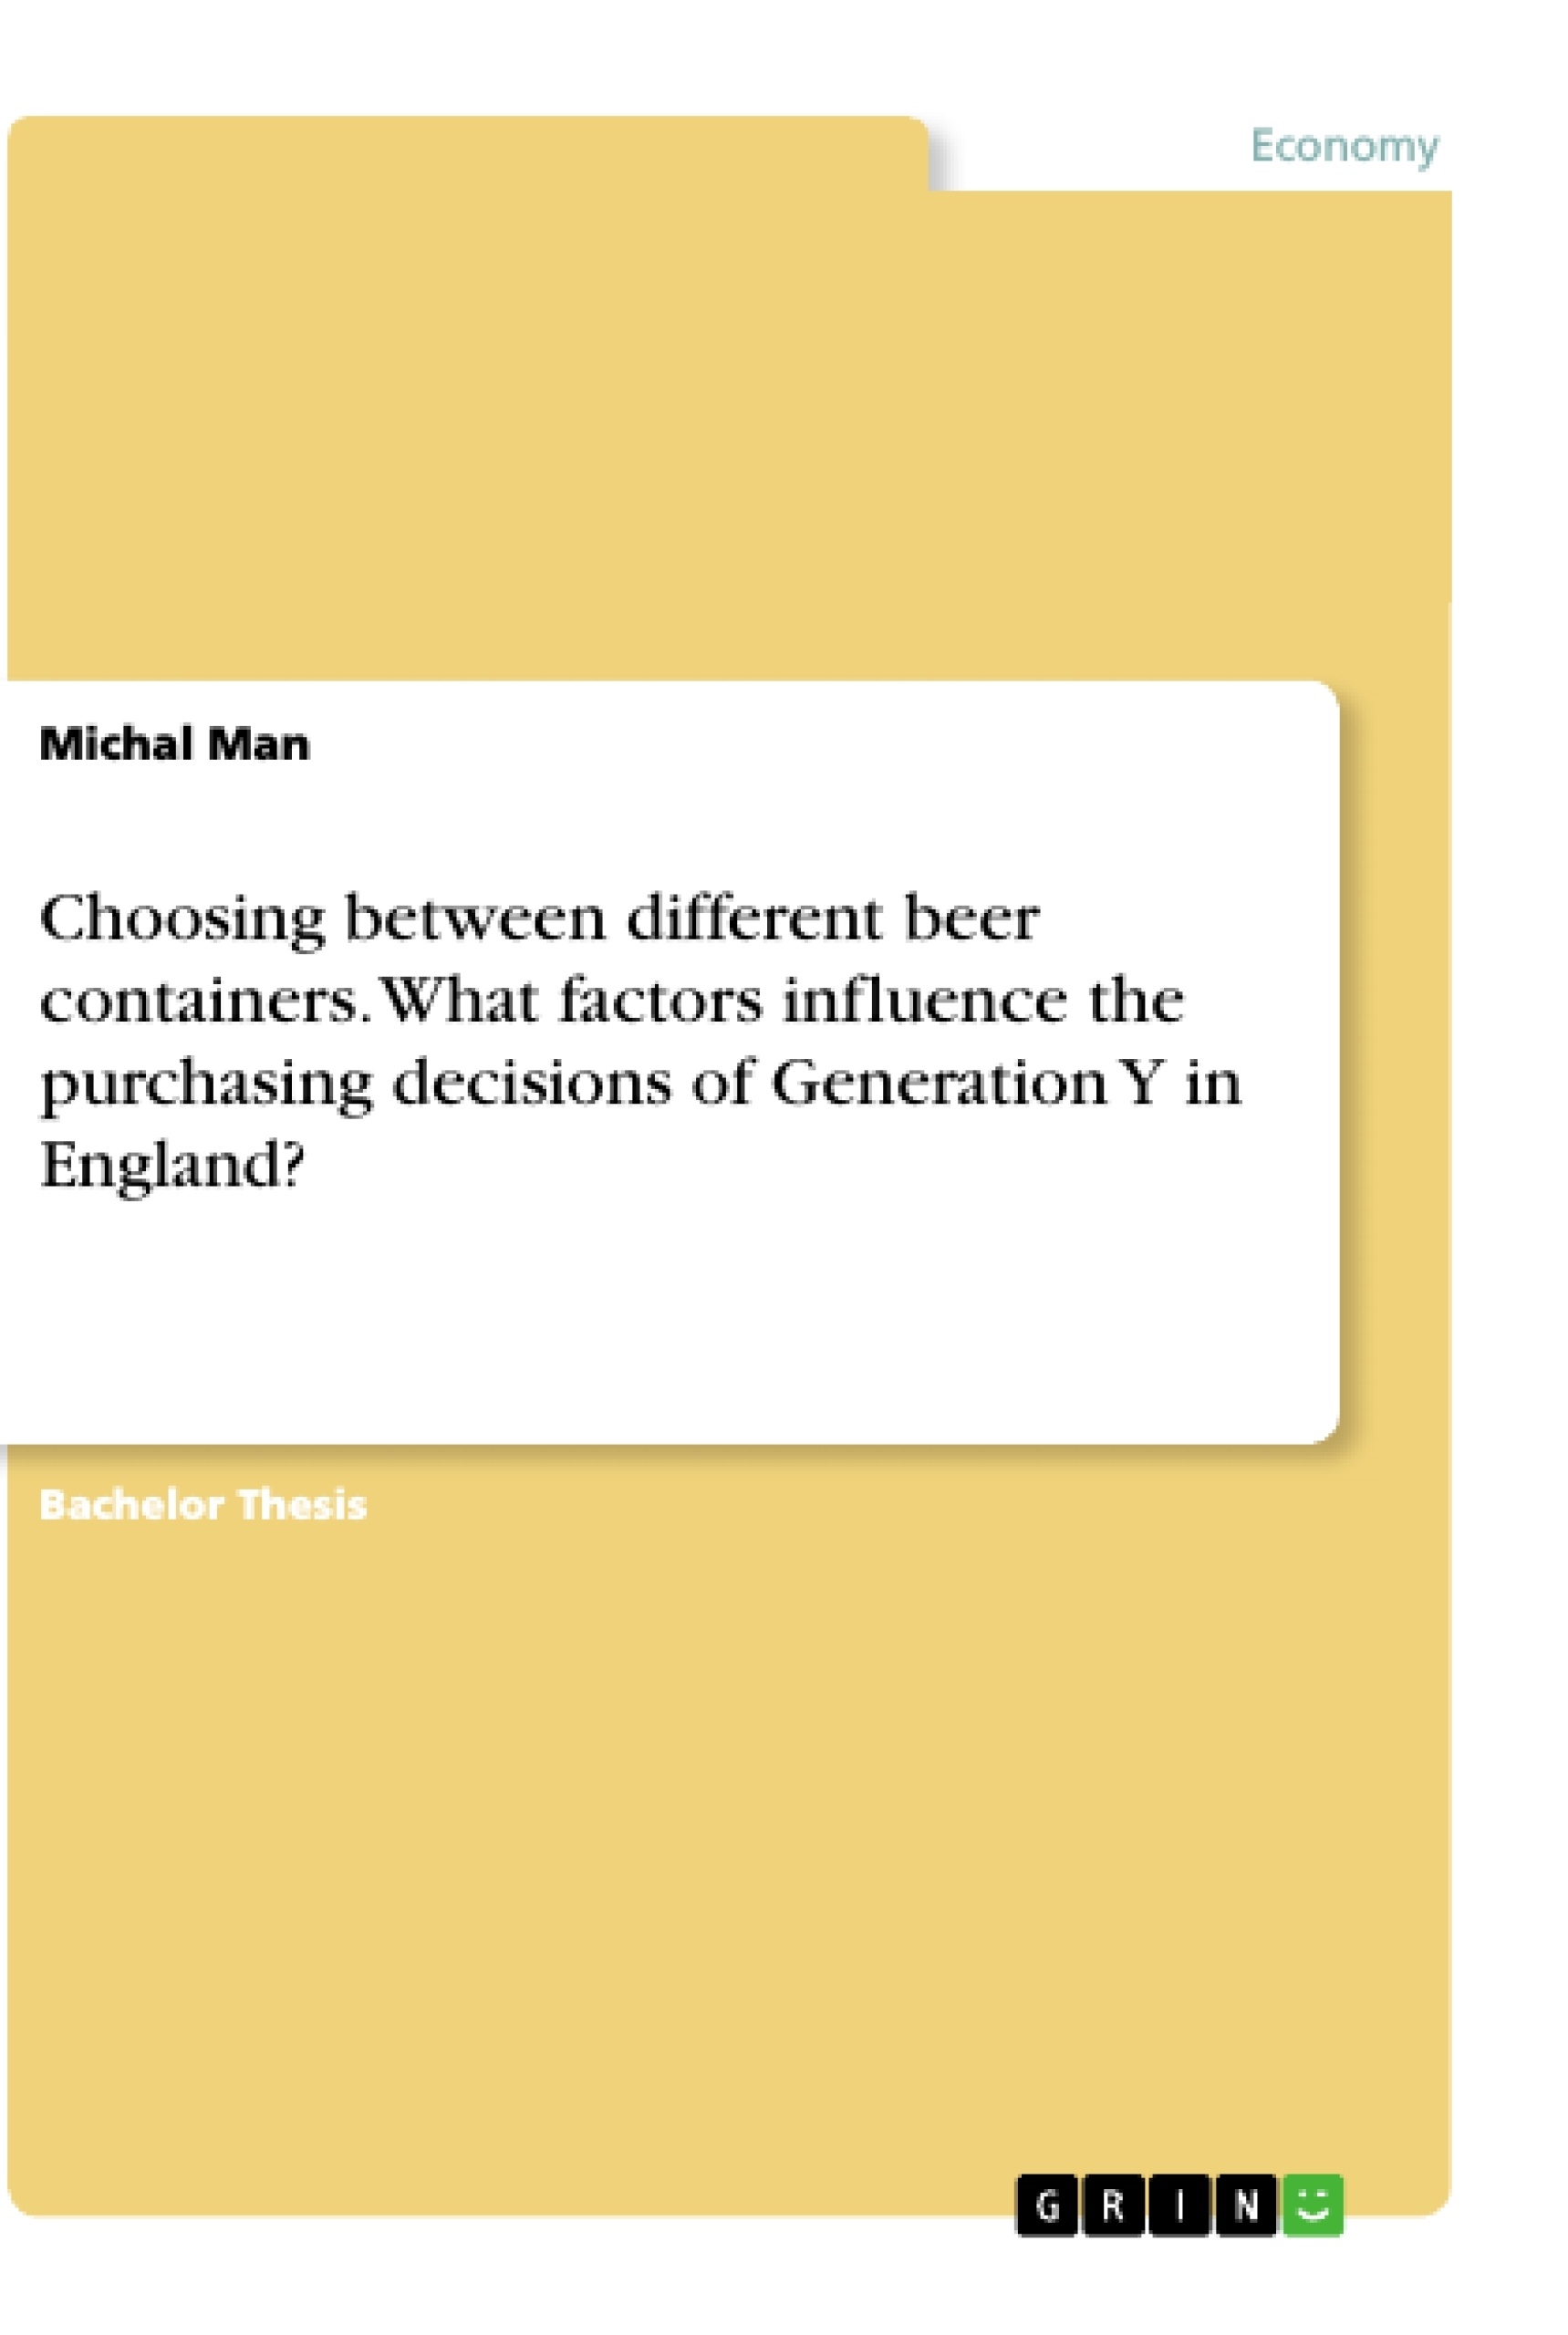 Title: Choosing between different beer containers. What factors influence the purchasing decisions of Generation Y in England?